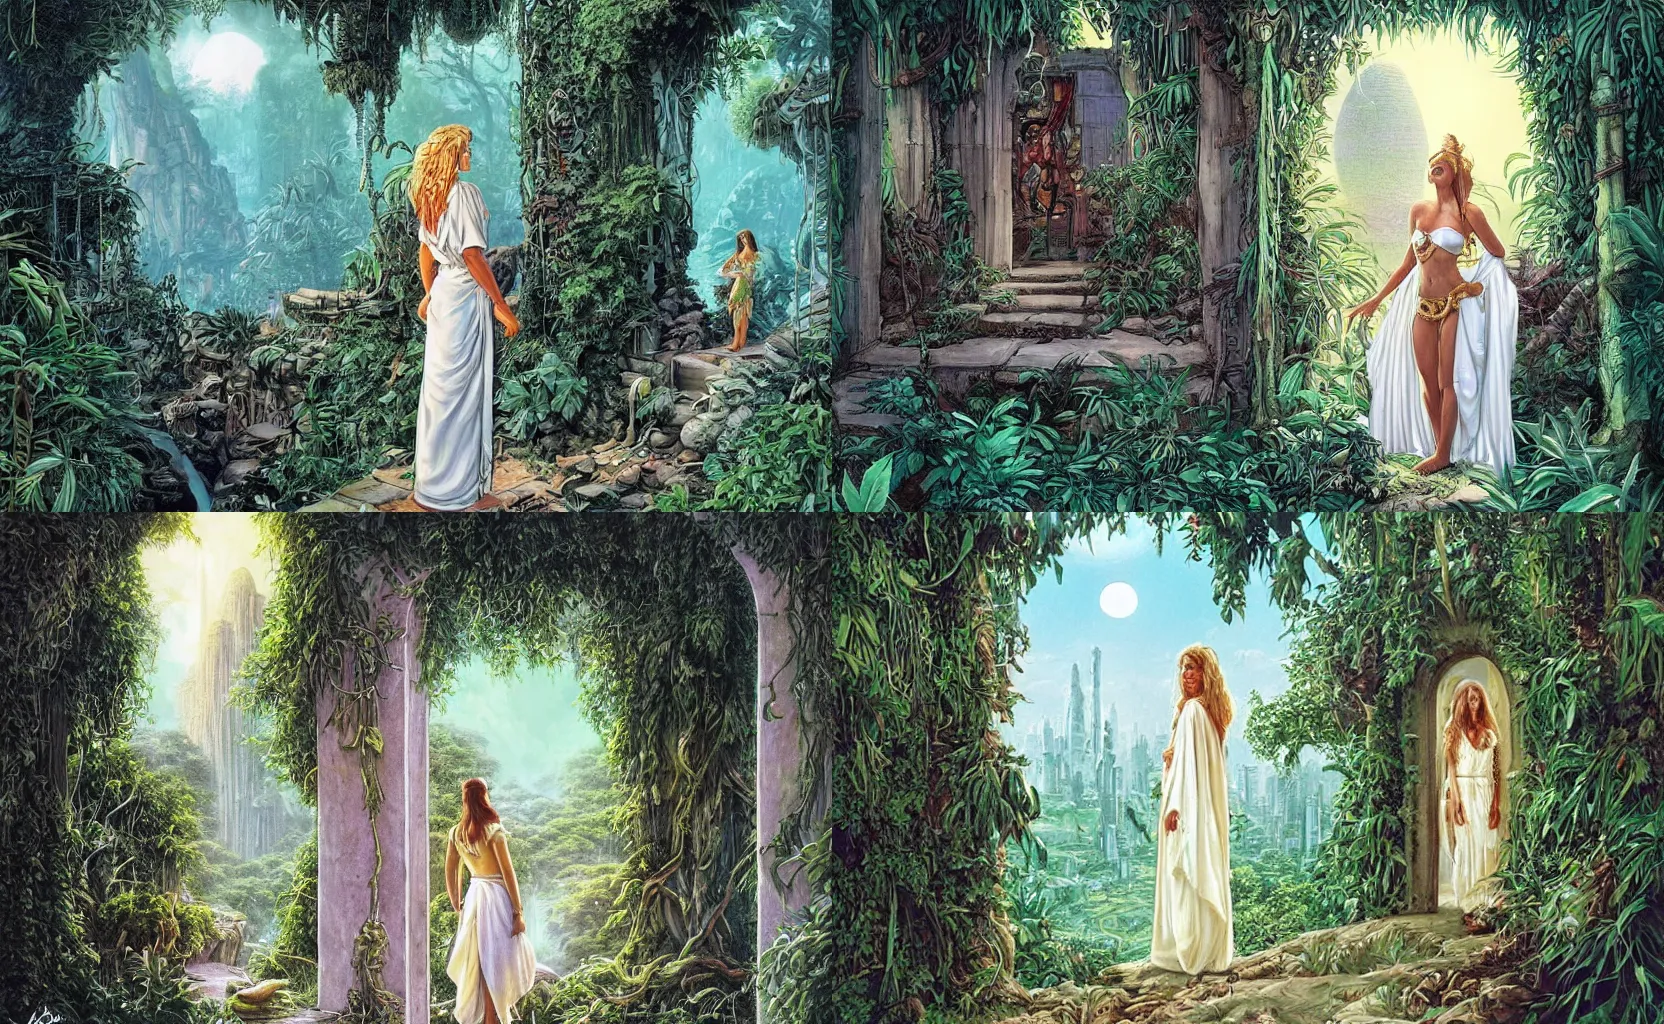 Prompt: A beautiful jungle princess wearing white robes stands in a doorway looking out over a fantastical city, by keith parkinson and michael whelan